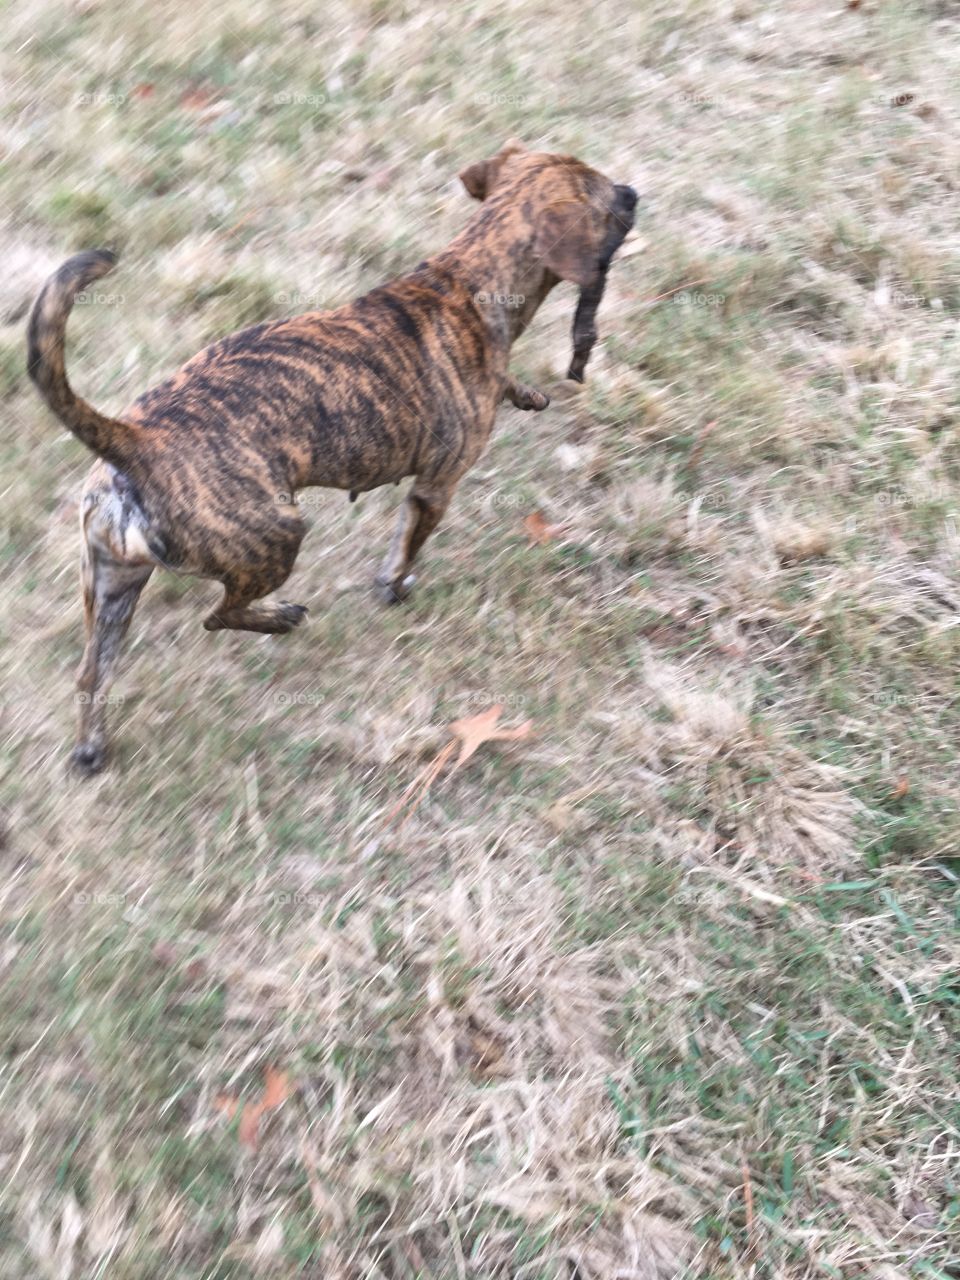 Running away with her new found treasure...a stick